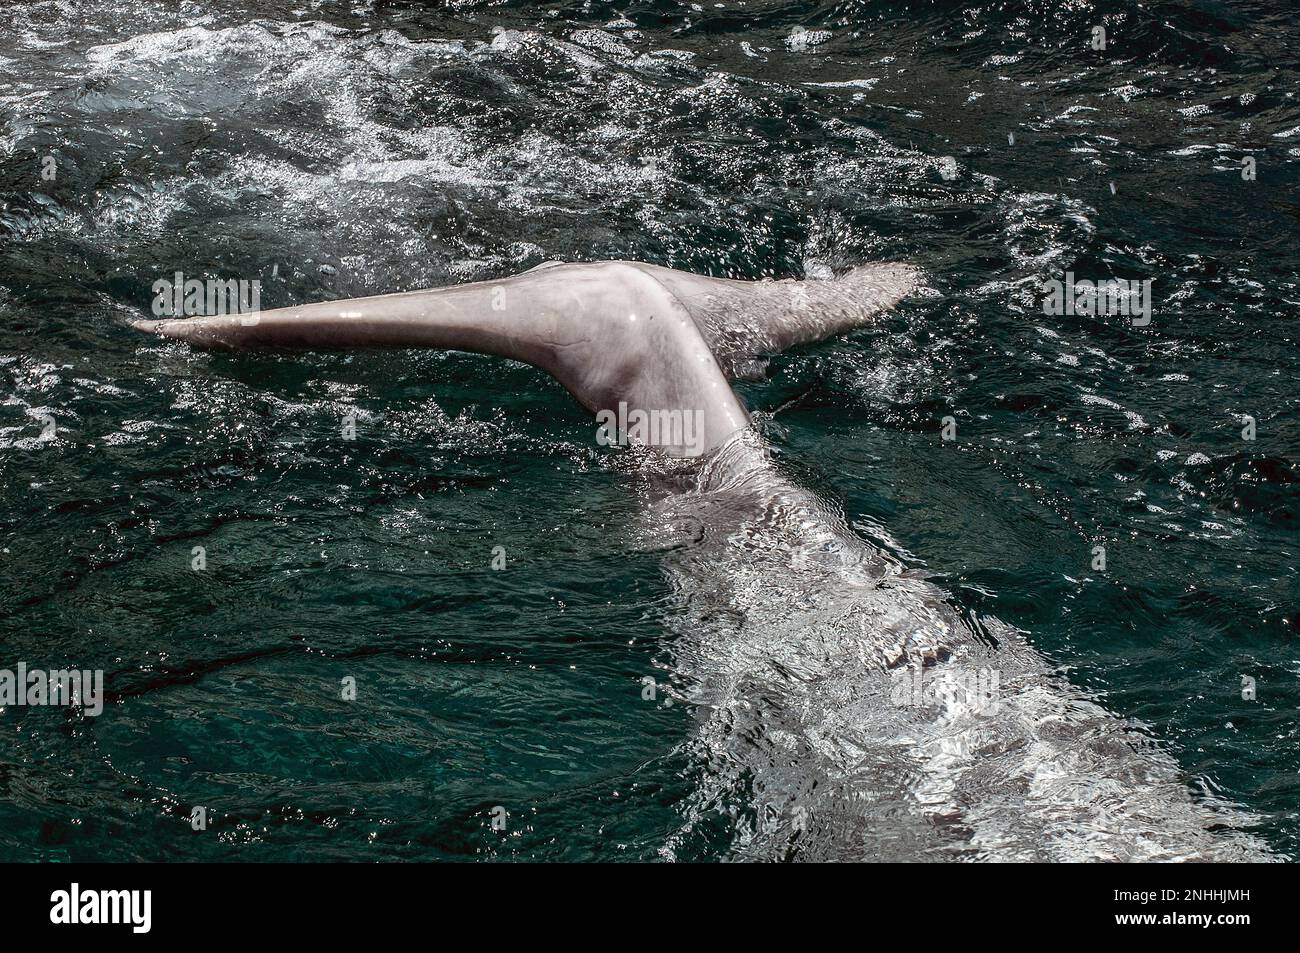 beluga whale close-up fluke, or tail pushing water while diving at surface Stock Photo